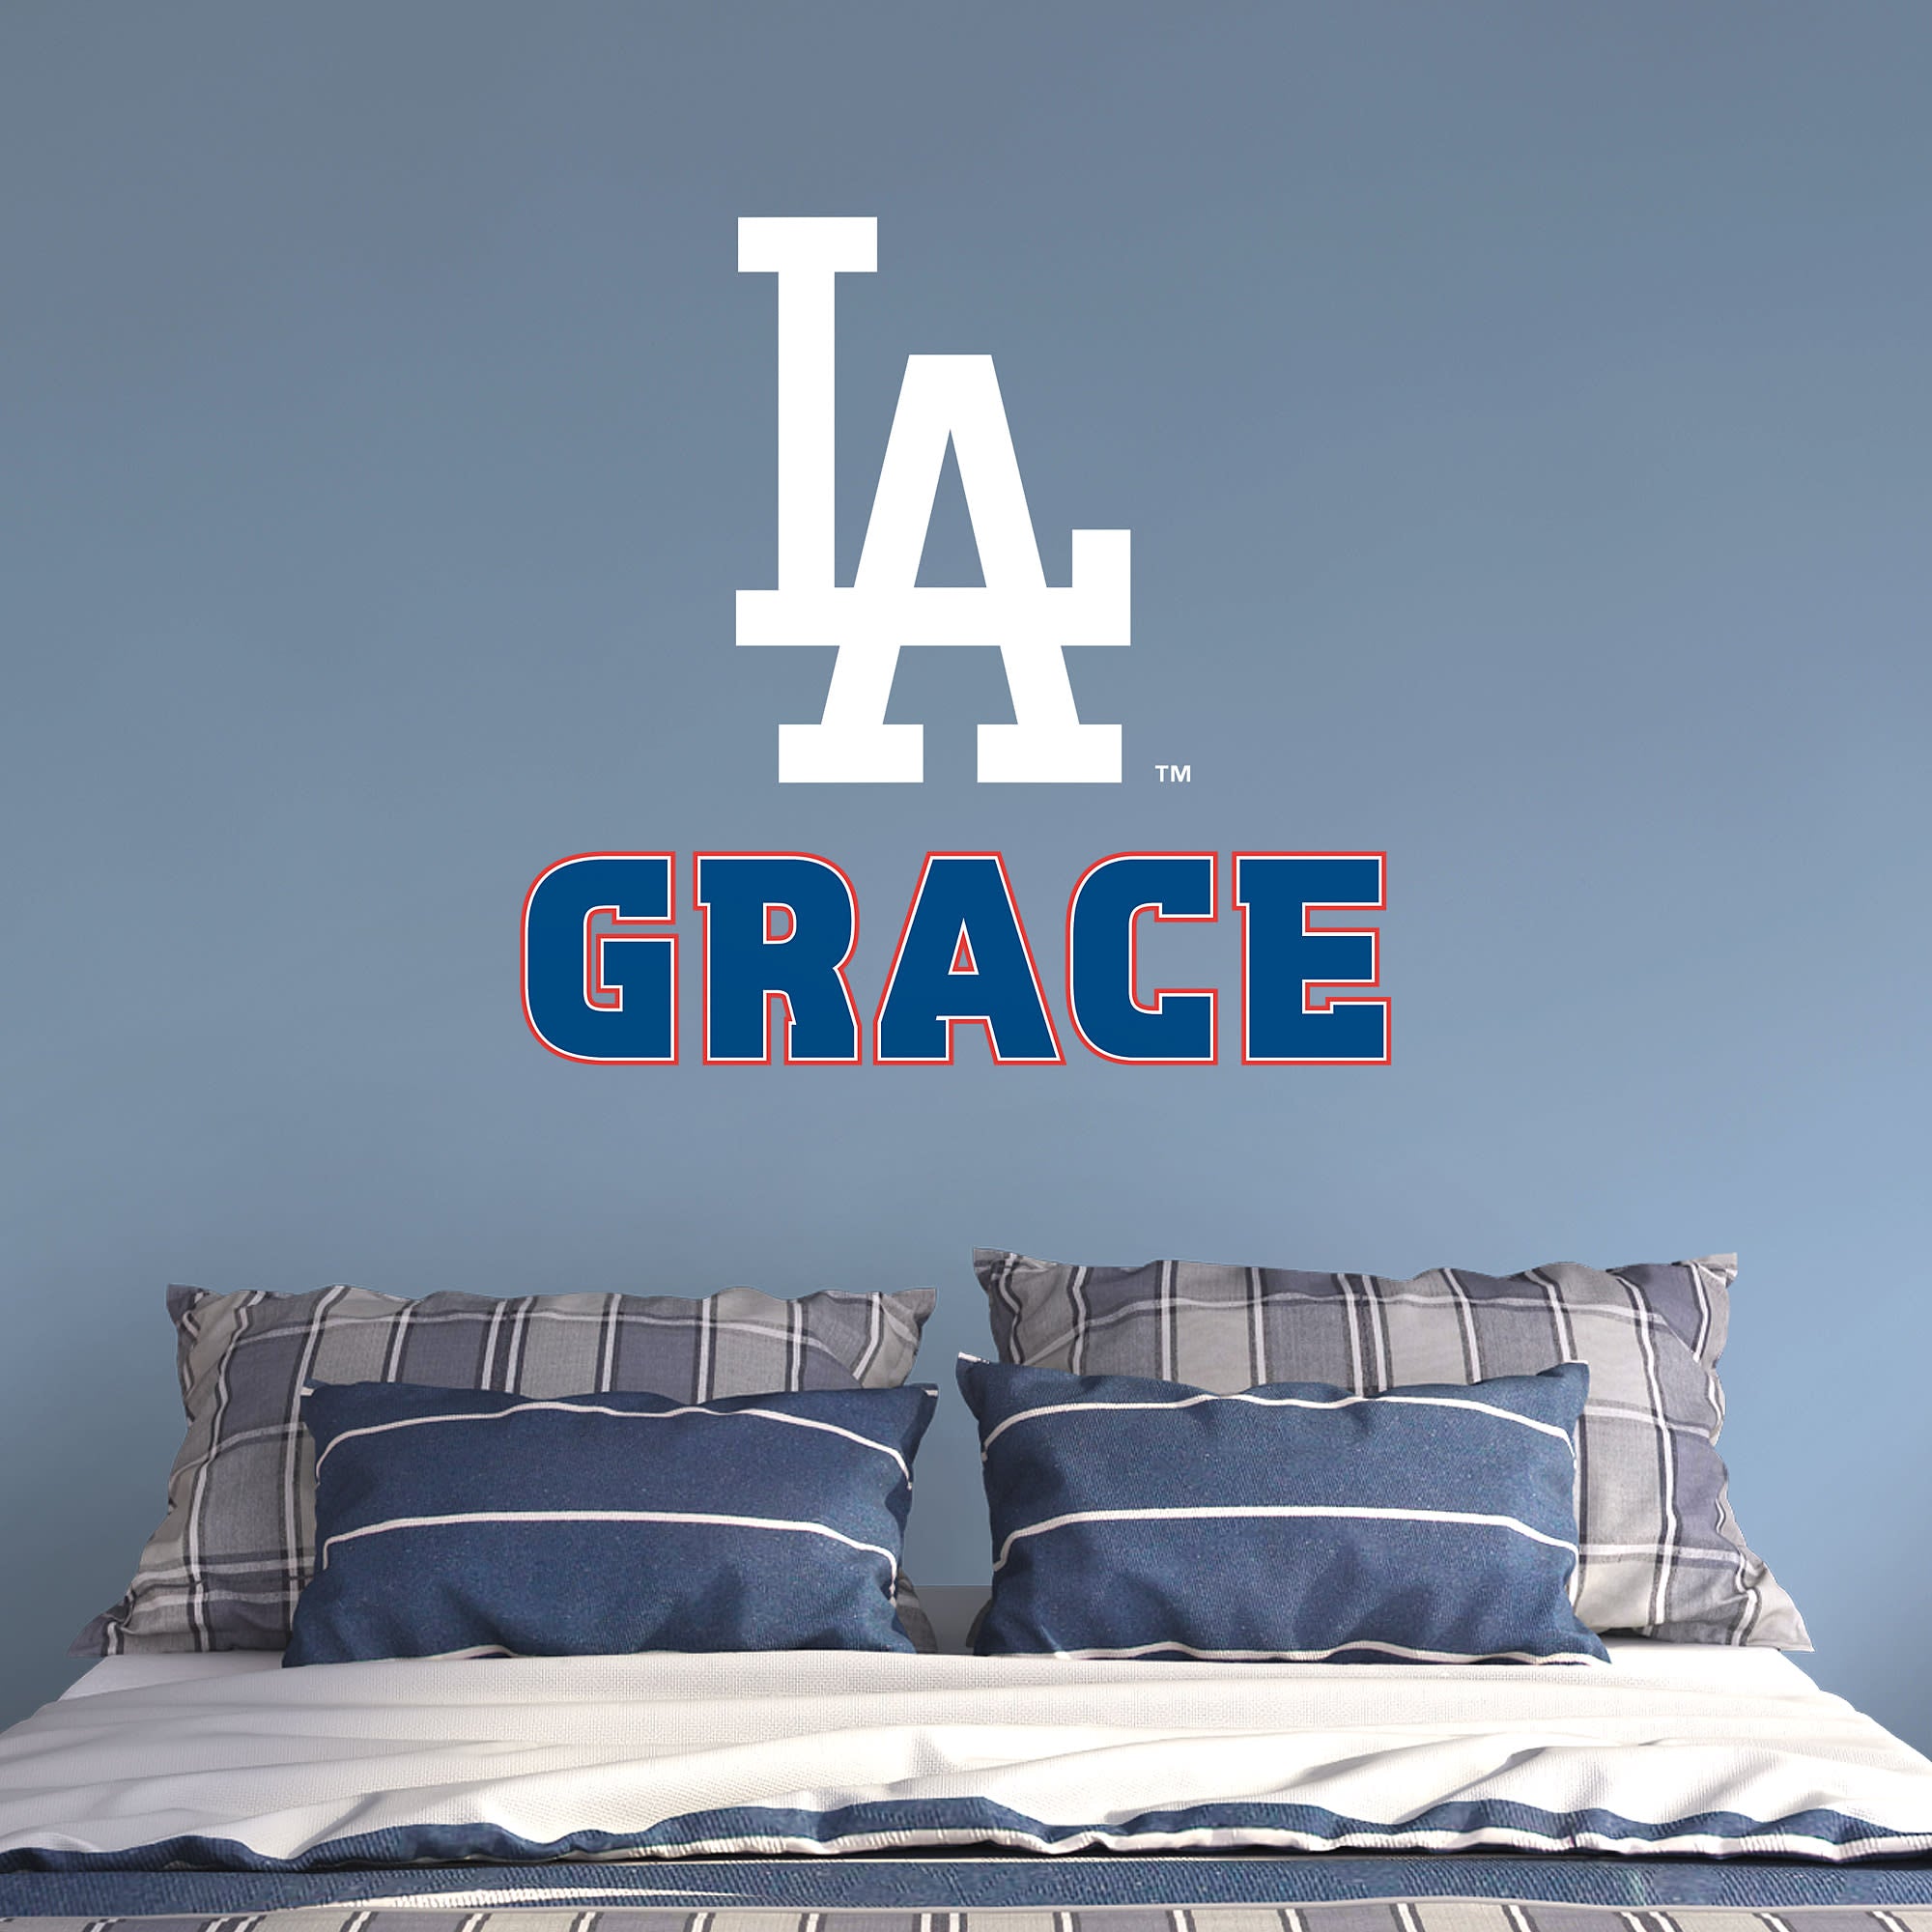 Los Angeles Dodgers: "LA" Stacked Personalized Name - Officially Licensed MLB Transfer Decal in White/Blue (52"W x 39.5"H) by Fa